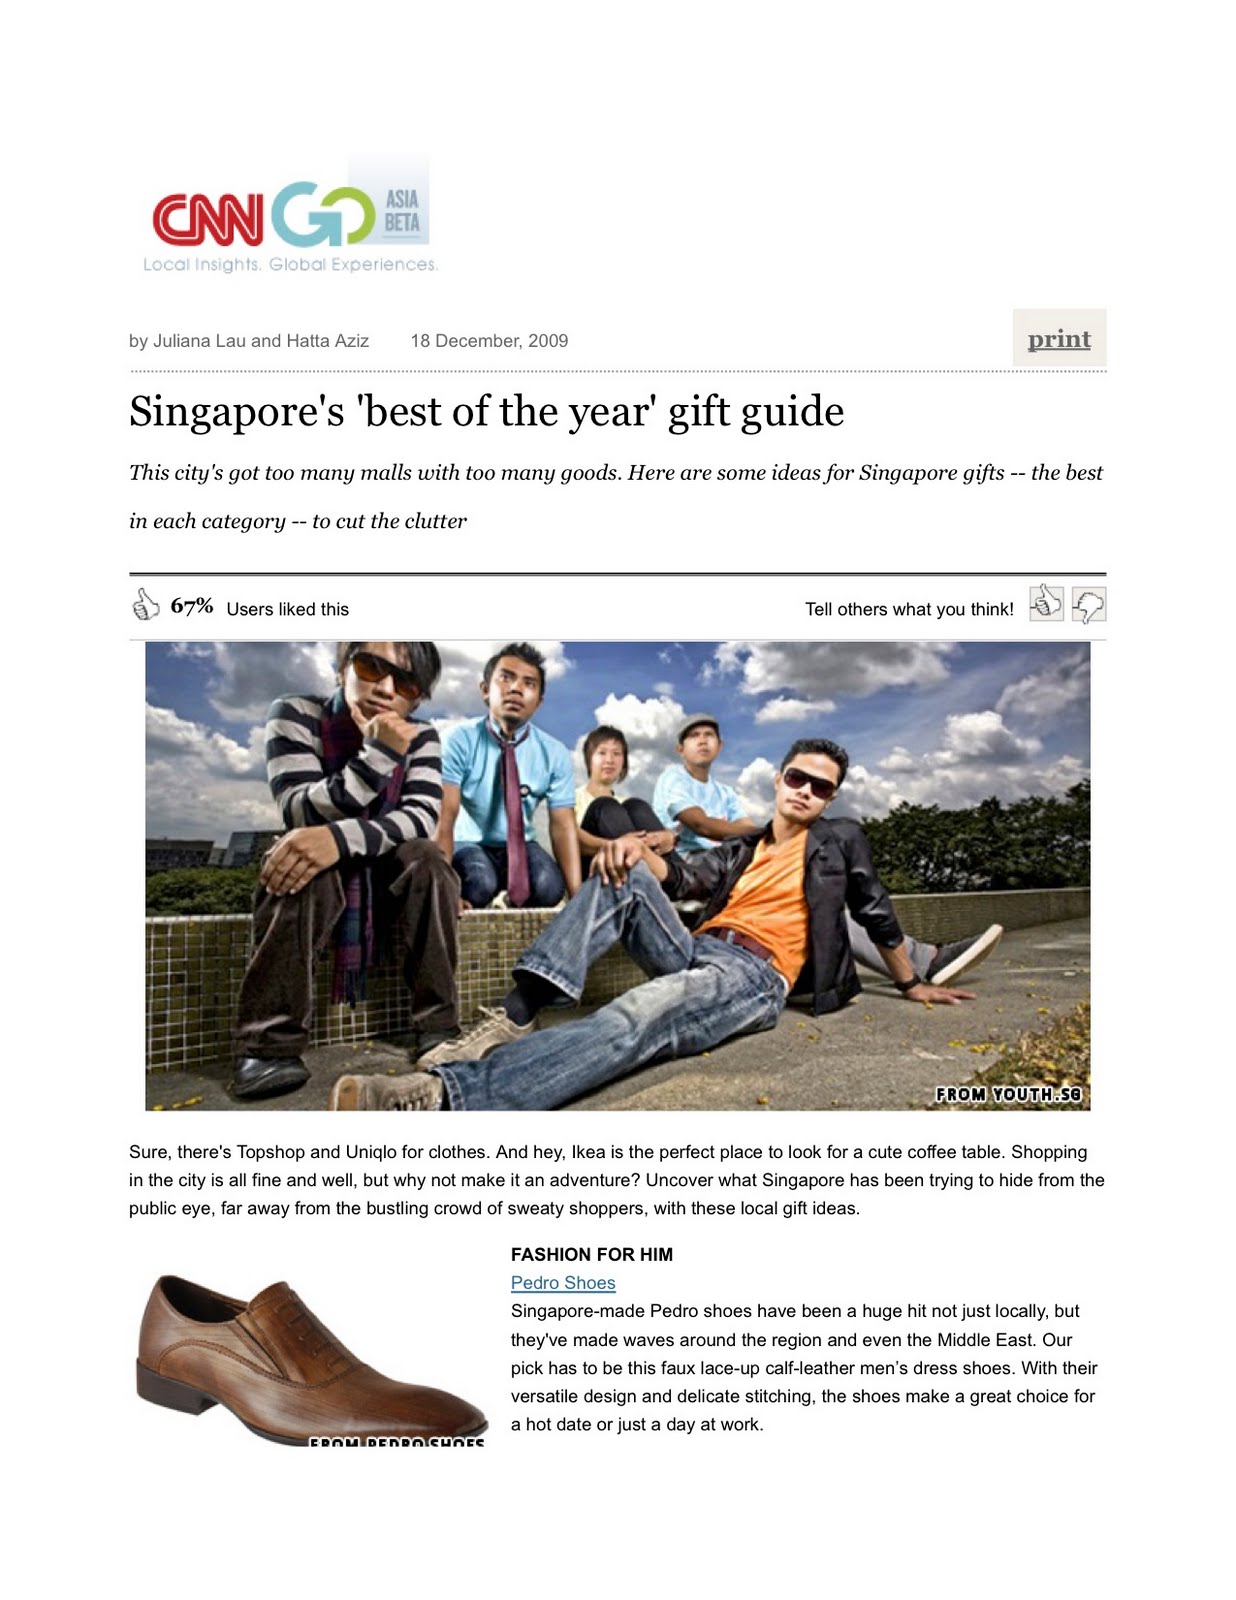 [Singapore's+'best+of+the+year'+gift+guide+|+CNNGo.com.jpg]